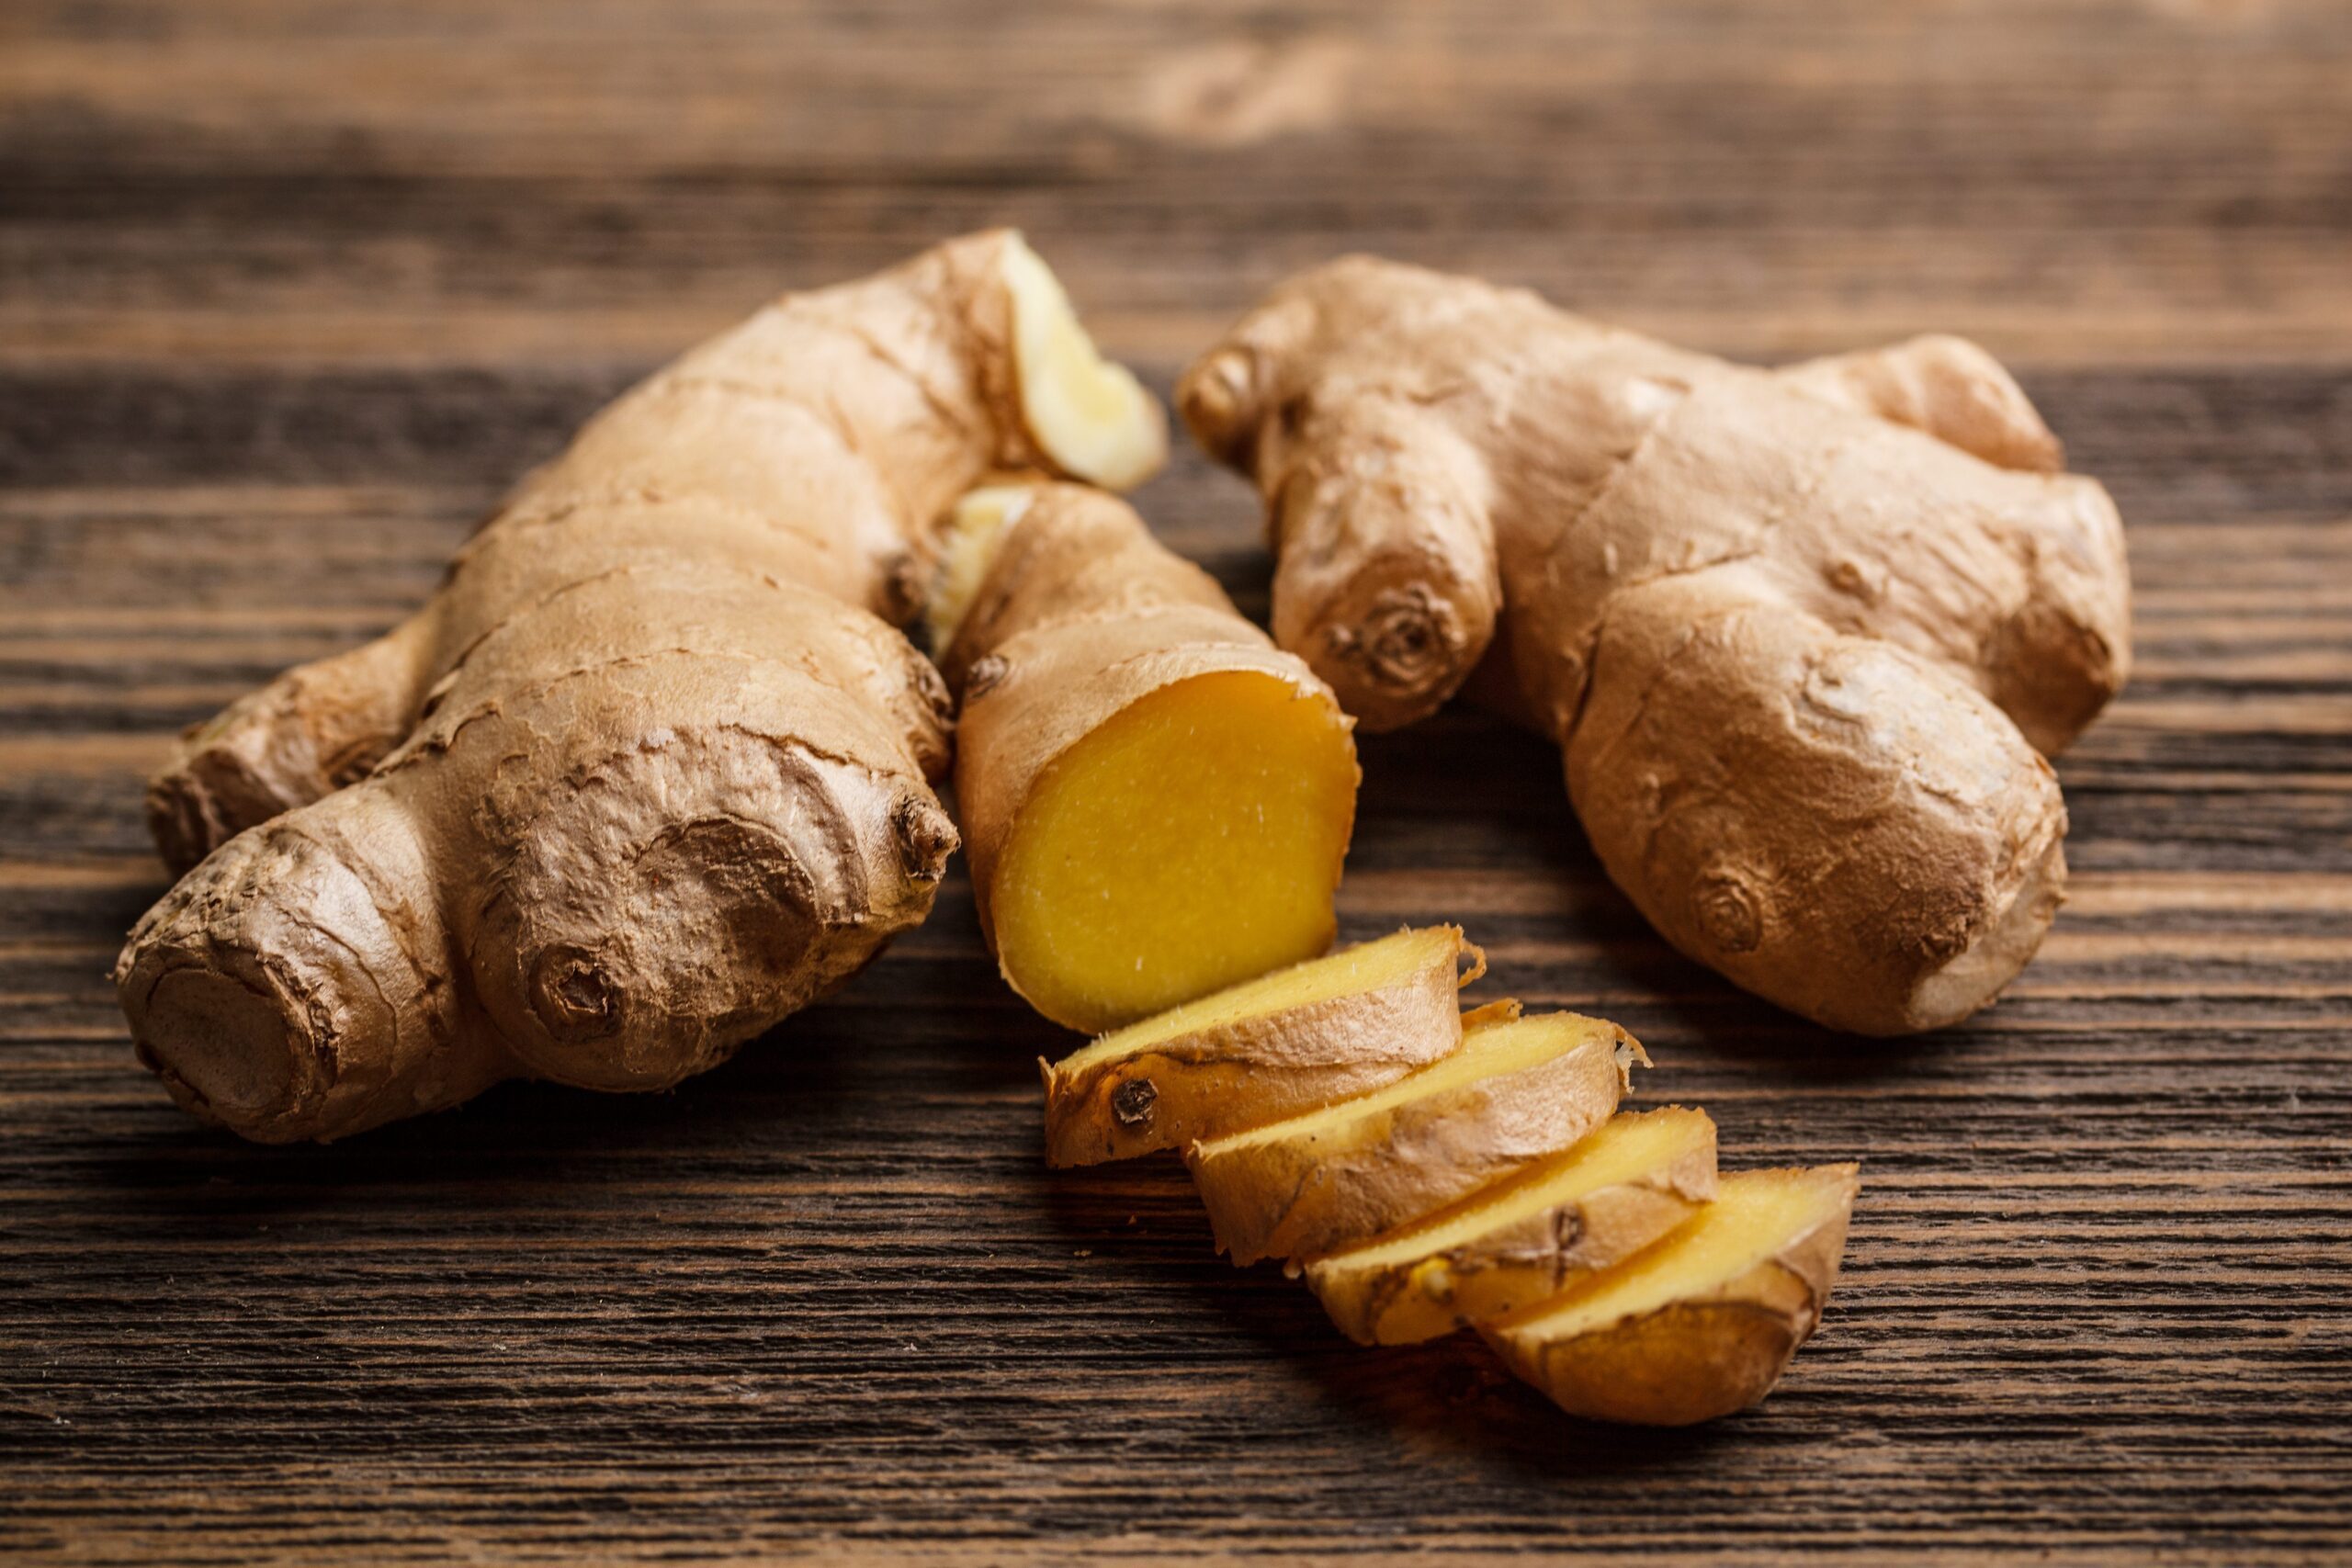 Ginger root whole and sliced